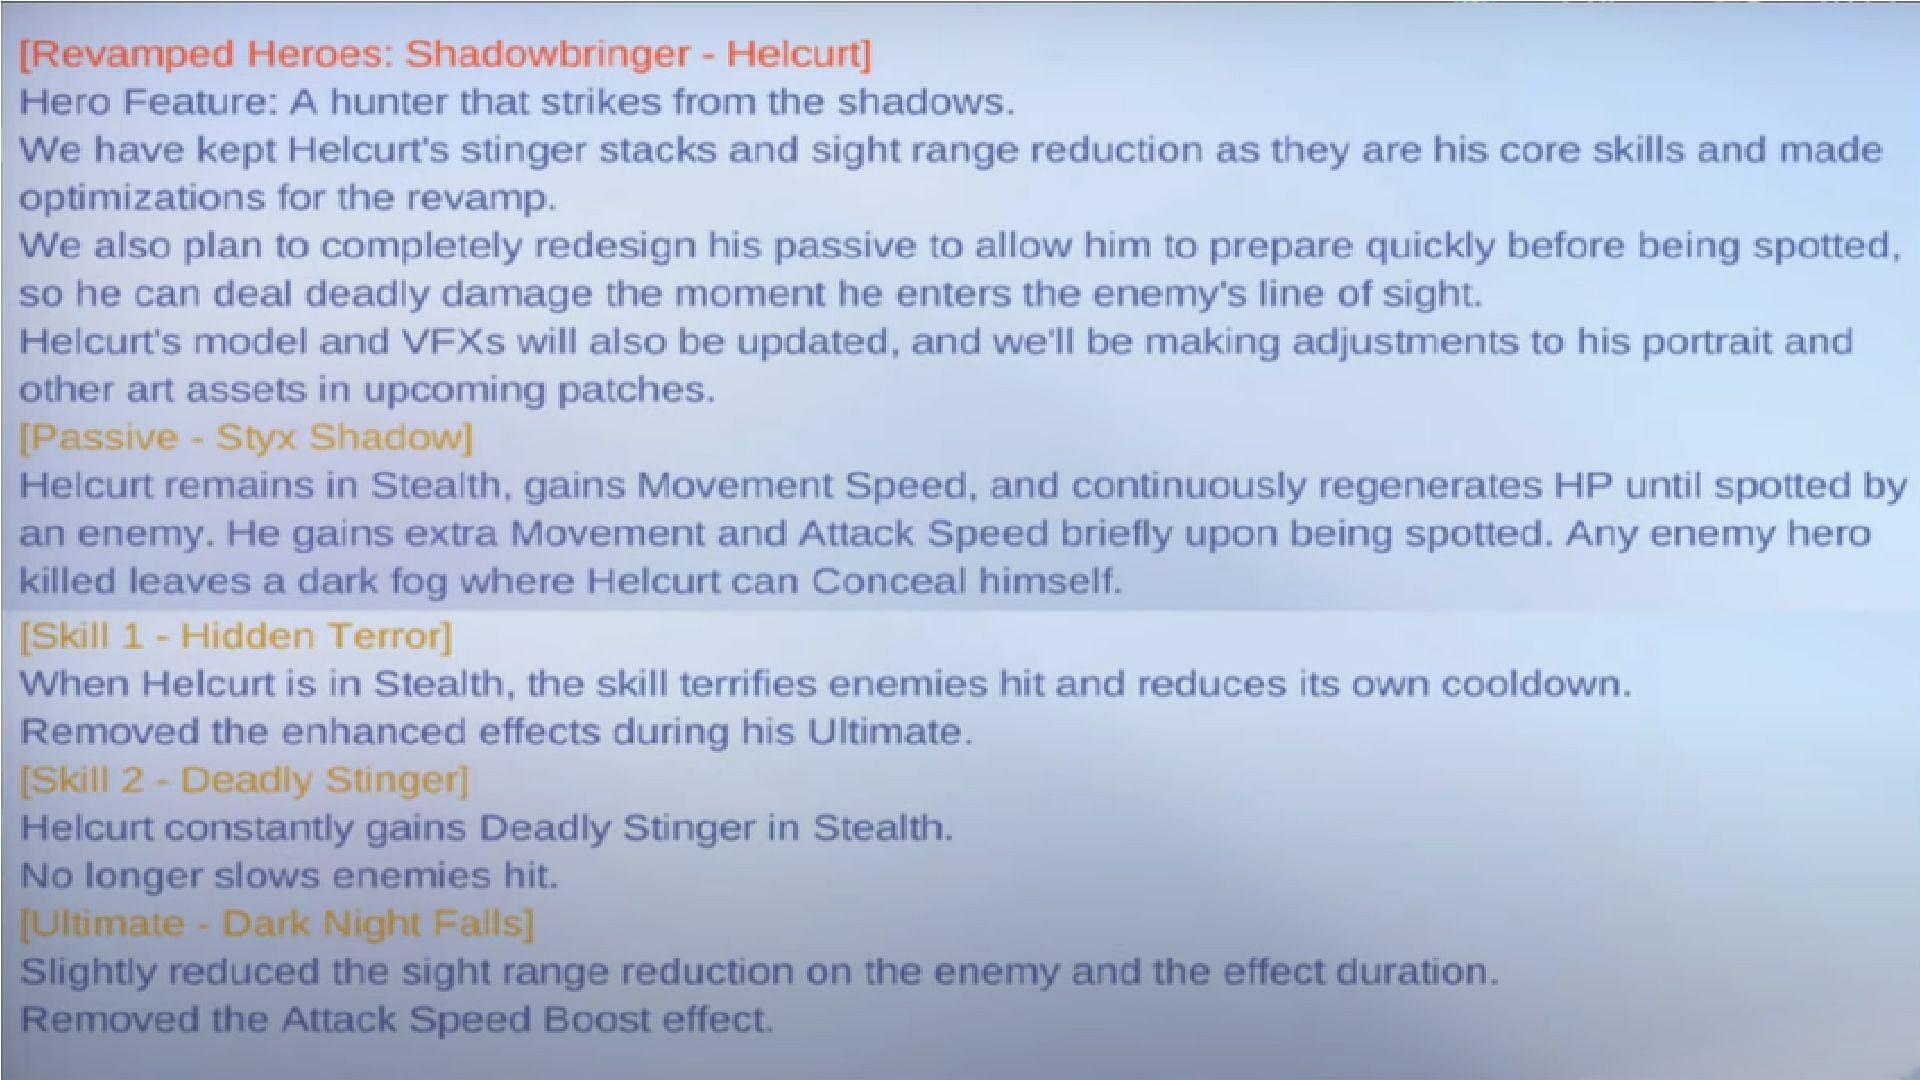 New changes in Helcurt after revamp as per Advanced Server (Image via Moonton Games)